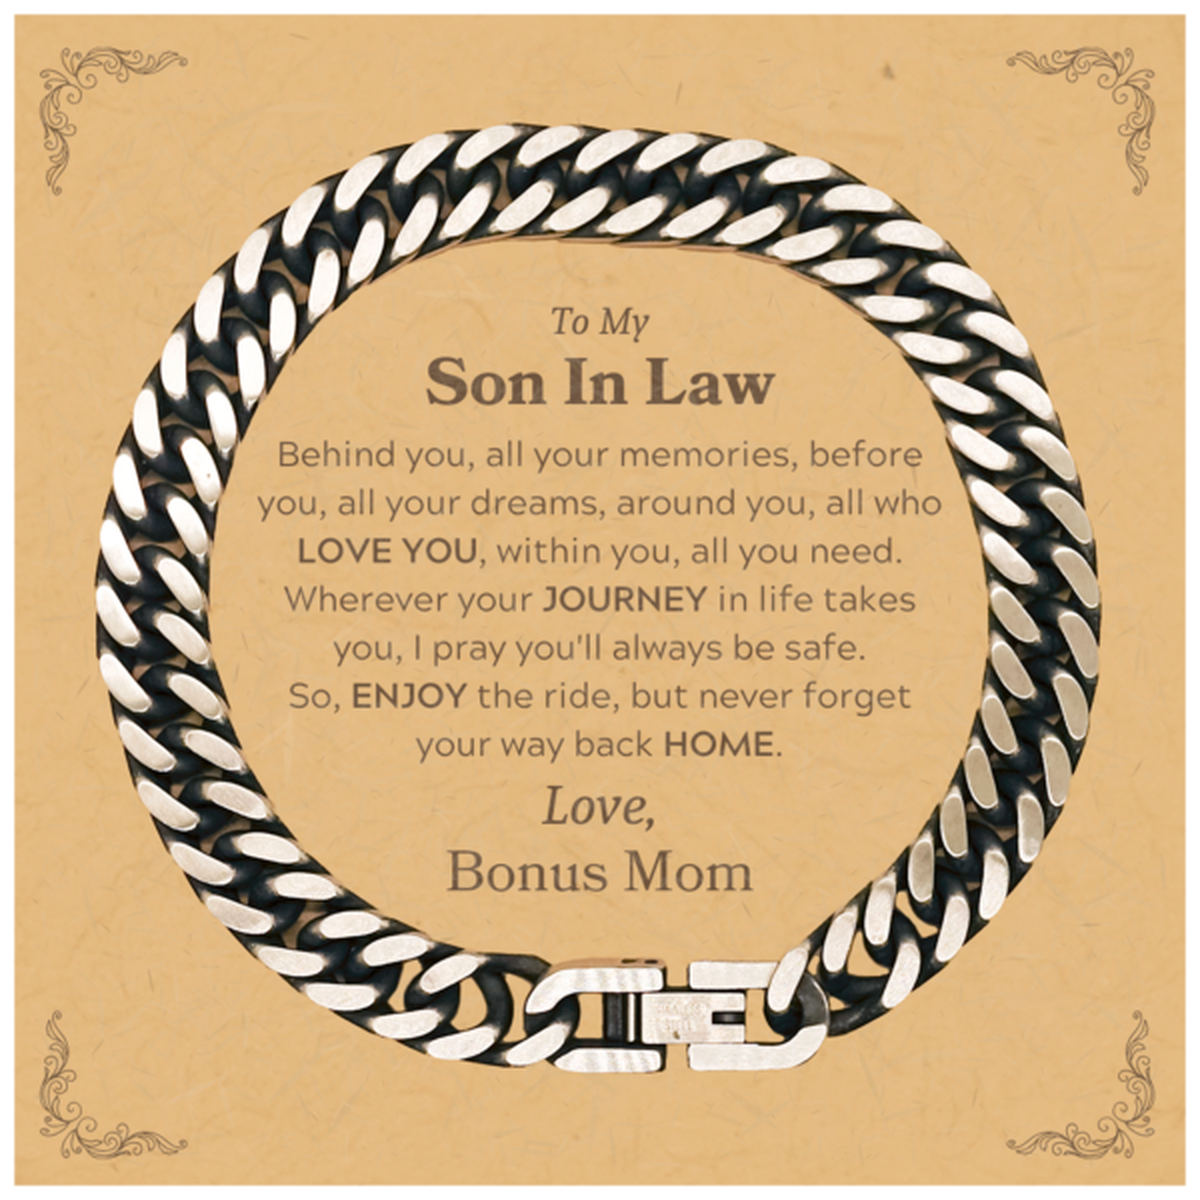 To My Son In Law Graduation Gifts from Bonus Mom, Son In Law Cuban Link Chain Bracelet Christmas Birthday Gifts for Son In Law Behind you, all your memories, before you, all your dreams. Love, Bonus Mom